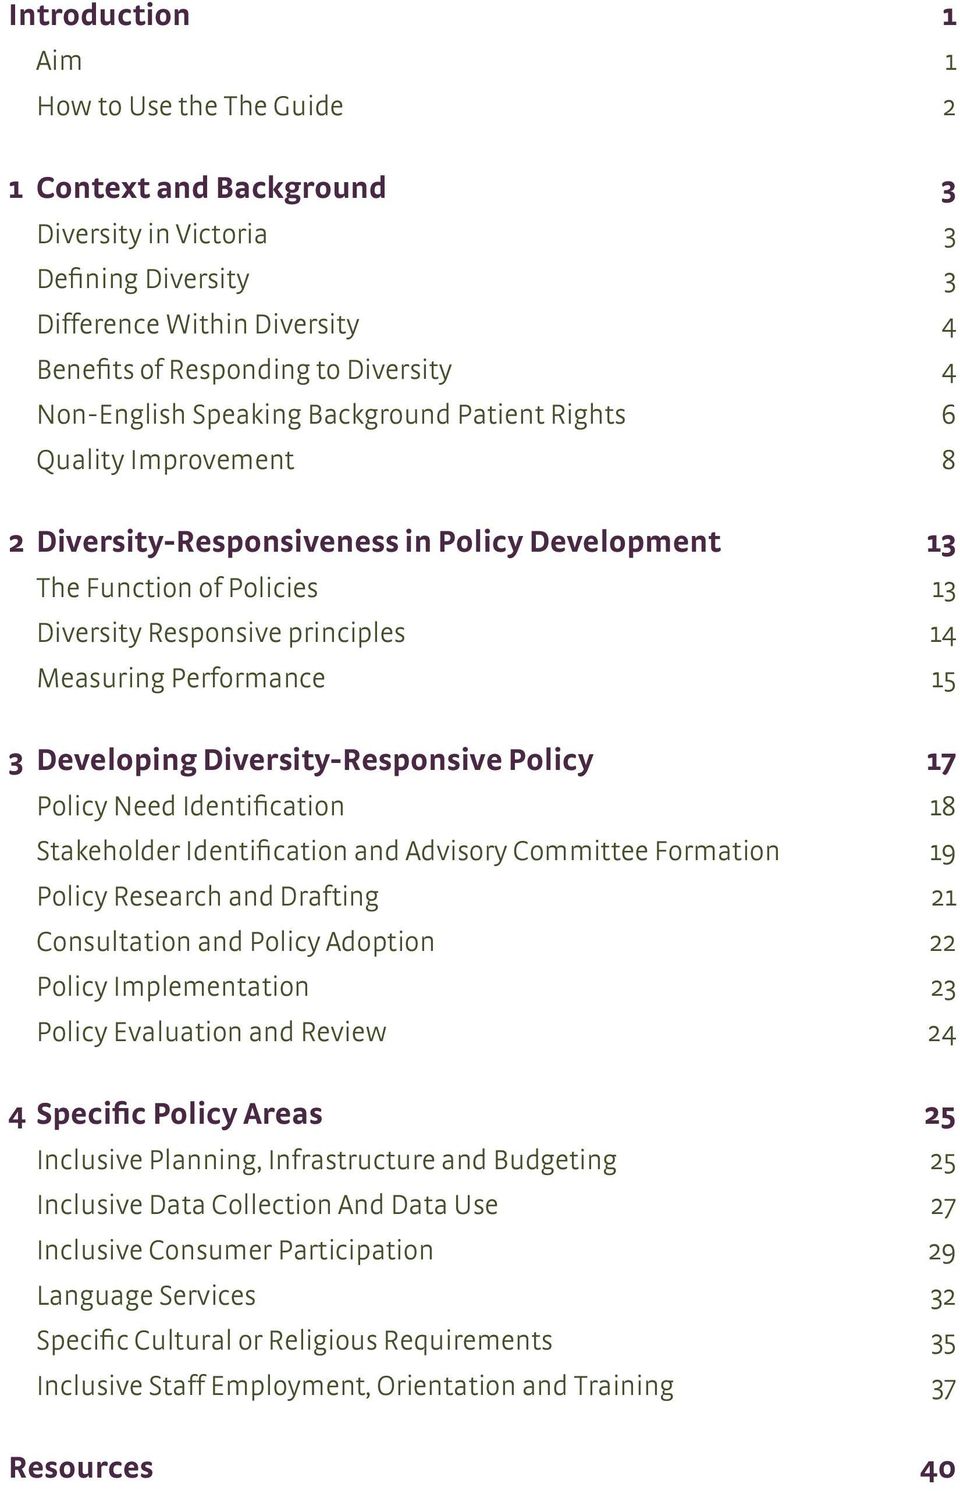 3 Developing Diversity-Responsive Policy 17 Policy Need Identification 18 Stakeholder Identification and Advisory Committee Formation 19 Policy Research and Drafting 21 Consultation and Policy